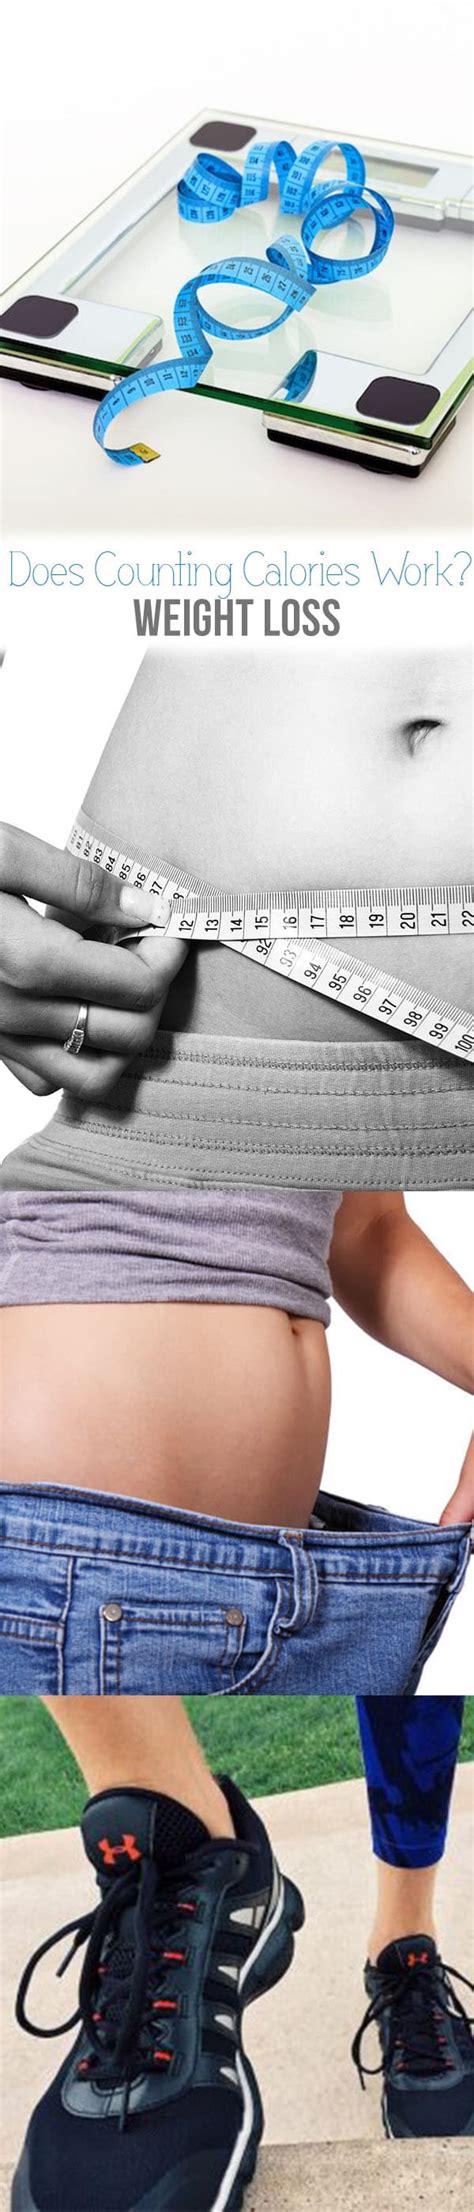 Why Counting Calories to Lose Weight Doesn’t Work Part 1